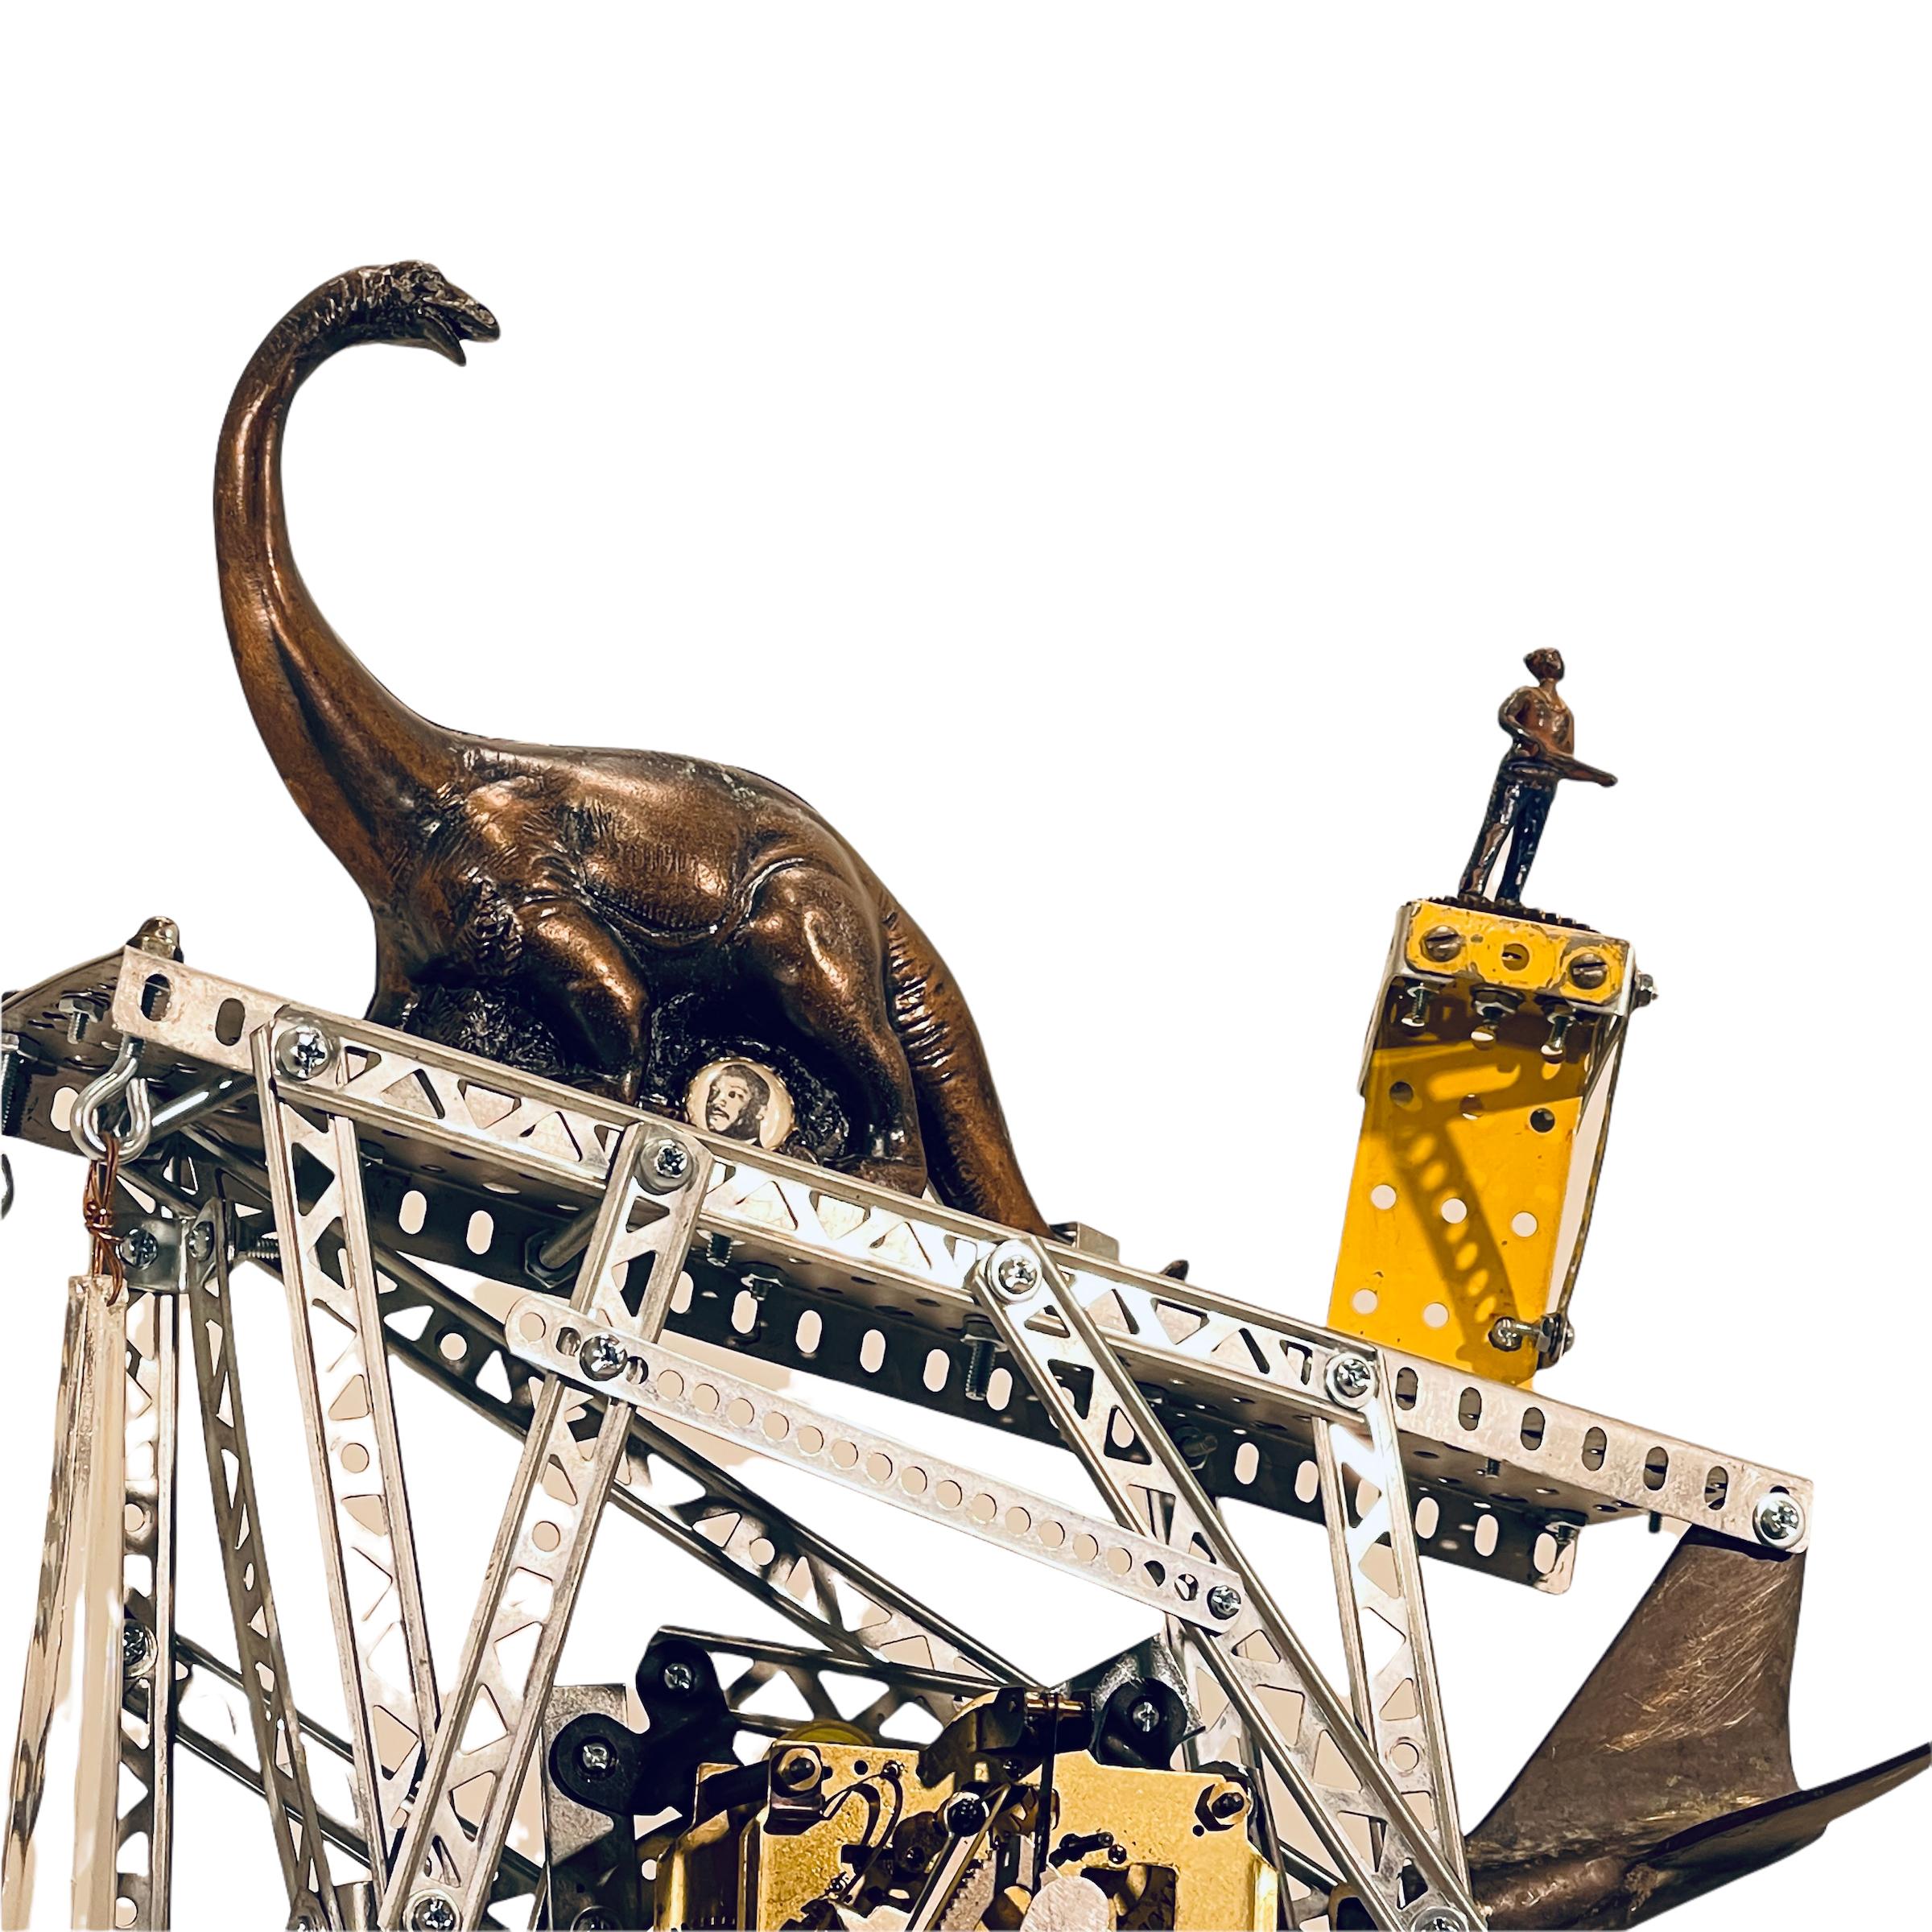 Culled together with the idea of extinction, John Seubert presents this working clock which includes a dinosaur, Aunt Jemima, and a jet colliding with a building in this ensemble piece. Created with found objects and ephemera, this working clock